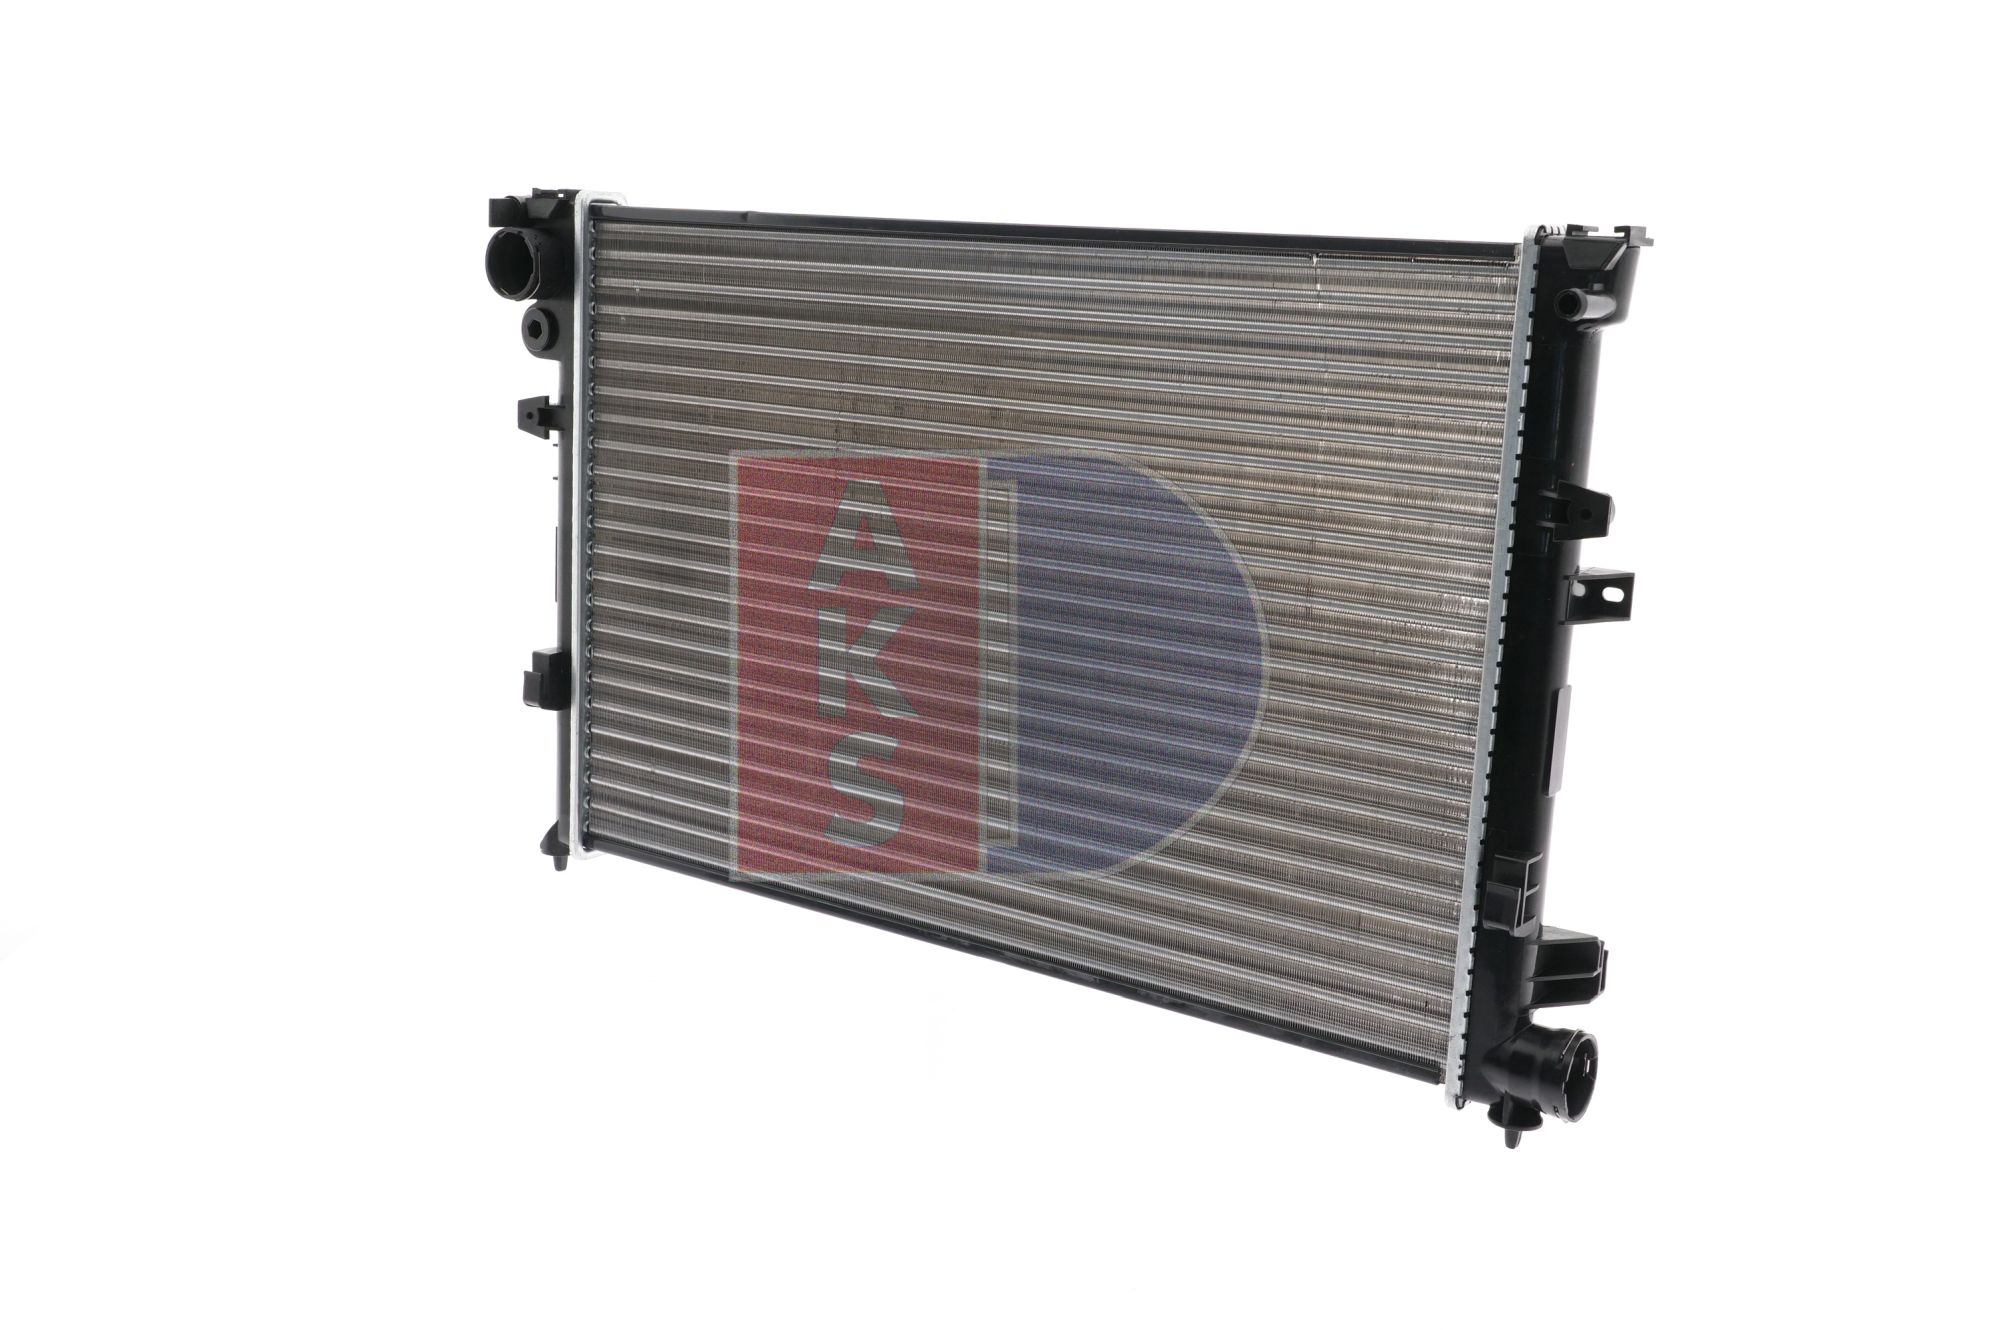 AKS DASIS 060570N Engine radiator 670 x 470 x 23 mm, Mechanically jointed cooling fins